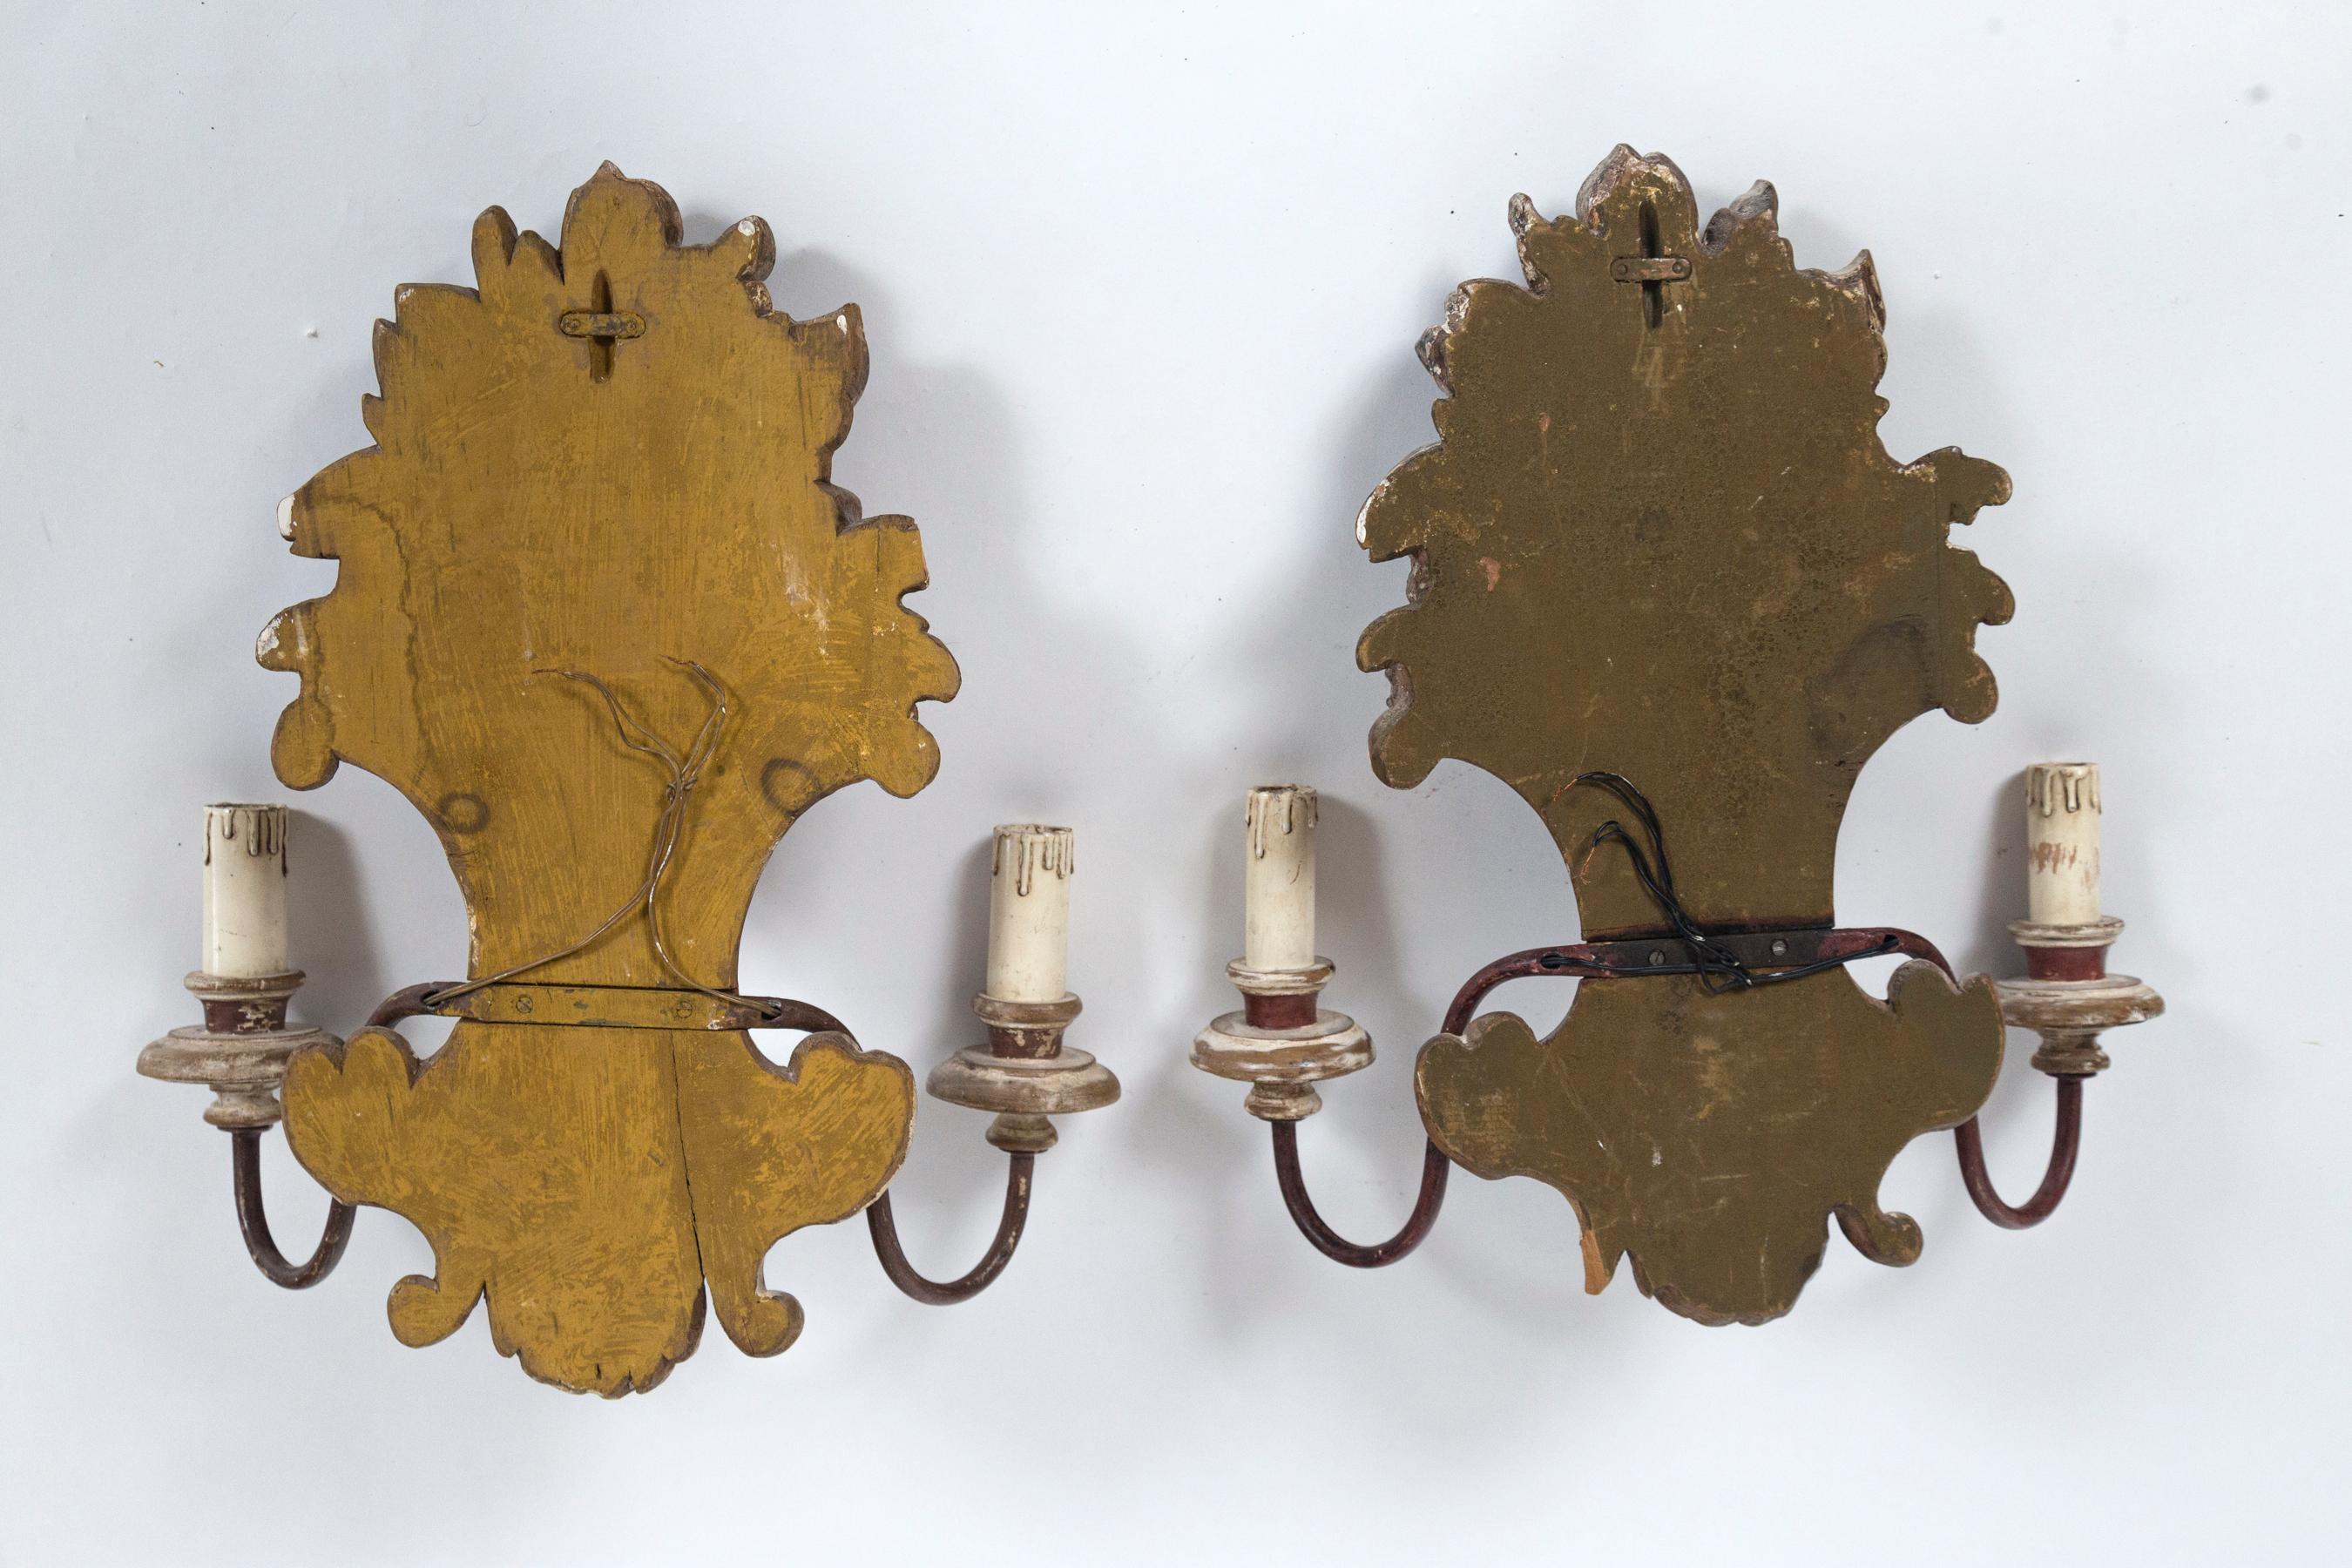 Pair of Antique Italian Carved Wood Sconces, Early 20th Century For Sale 7